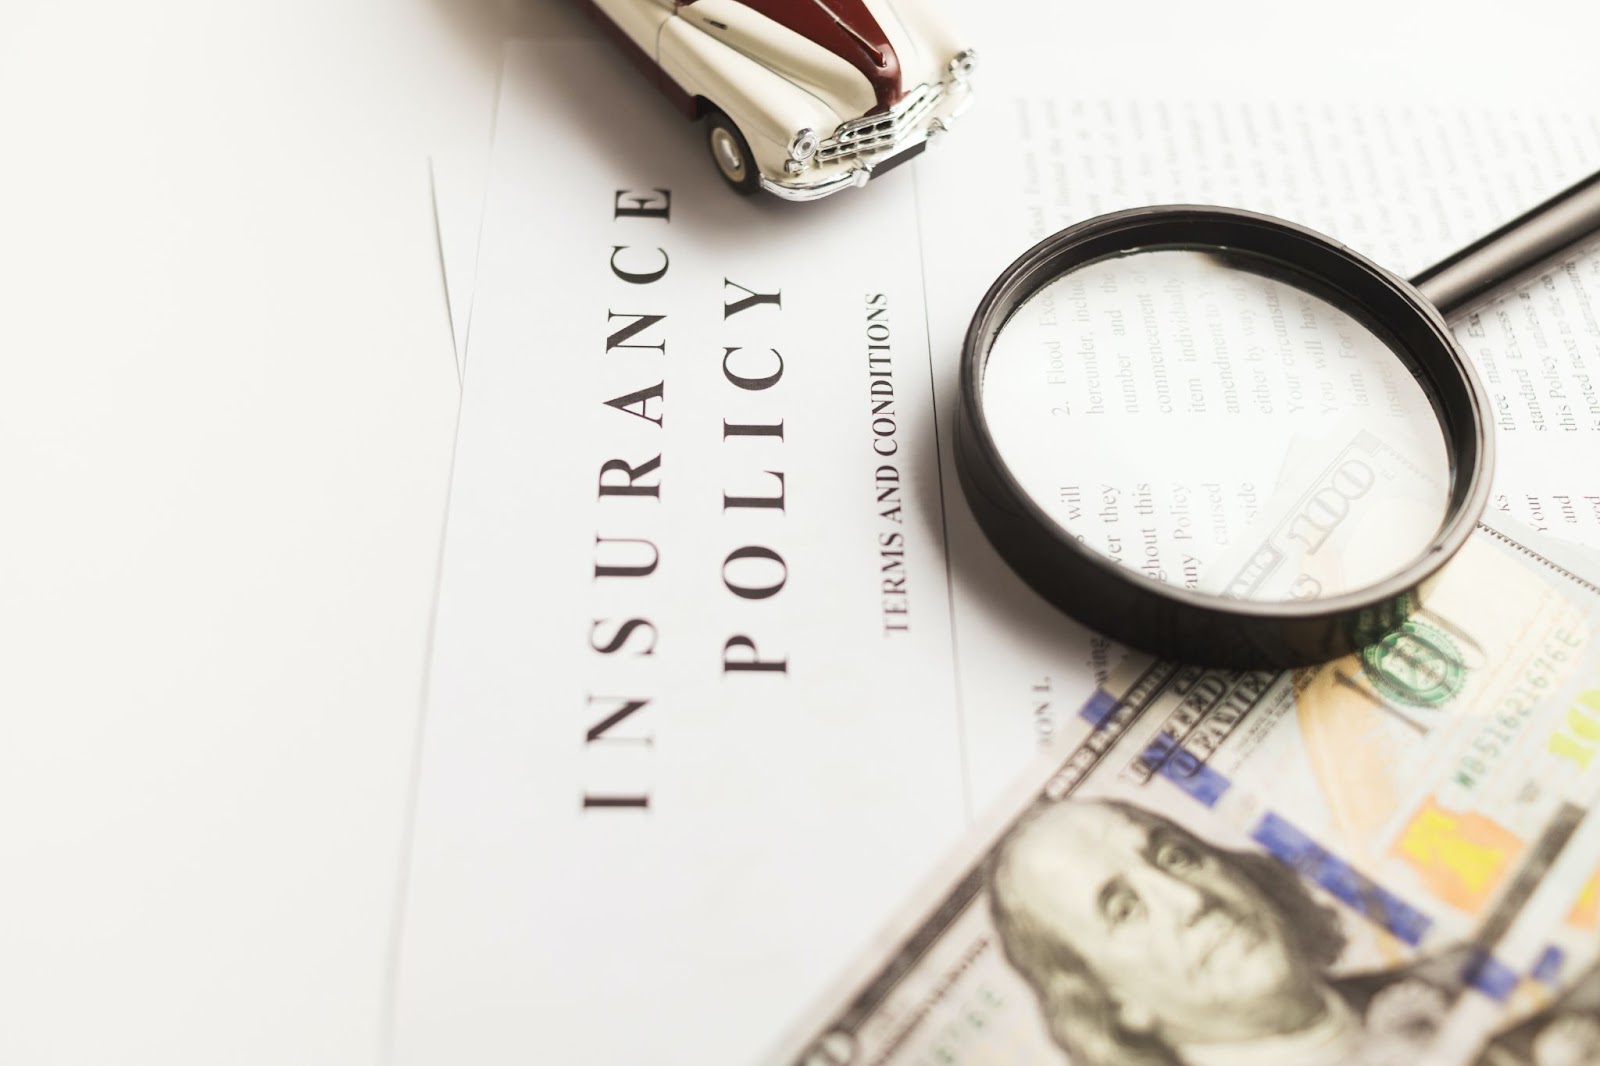 An image of an insurance policy with a magnifying glass, 100 dollar bill and a collectable toy car